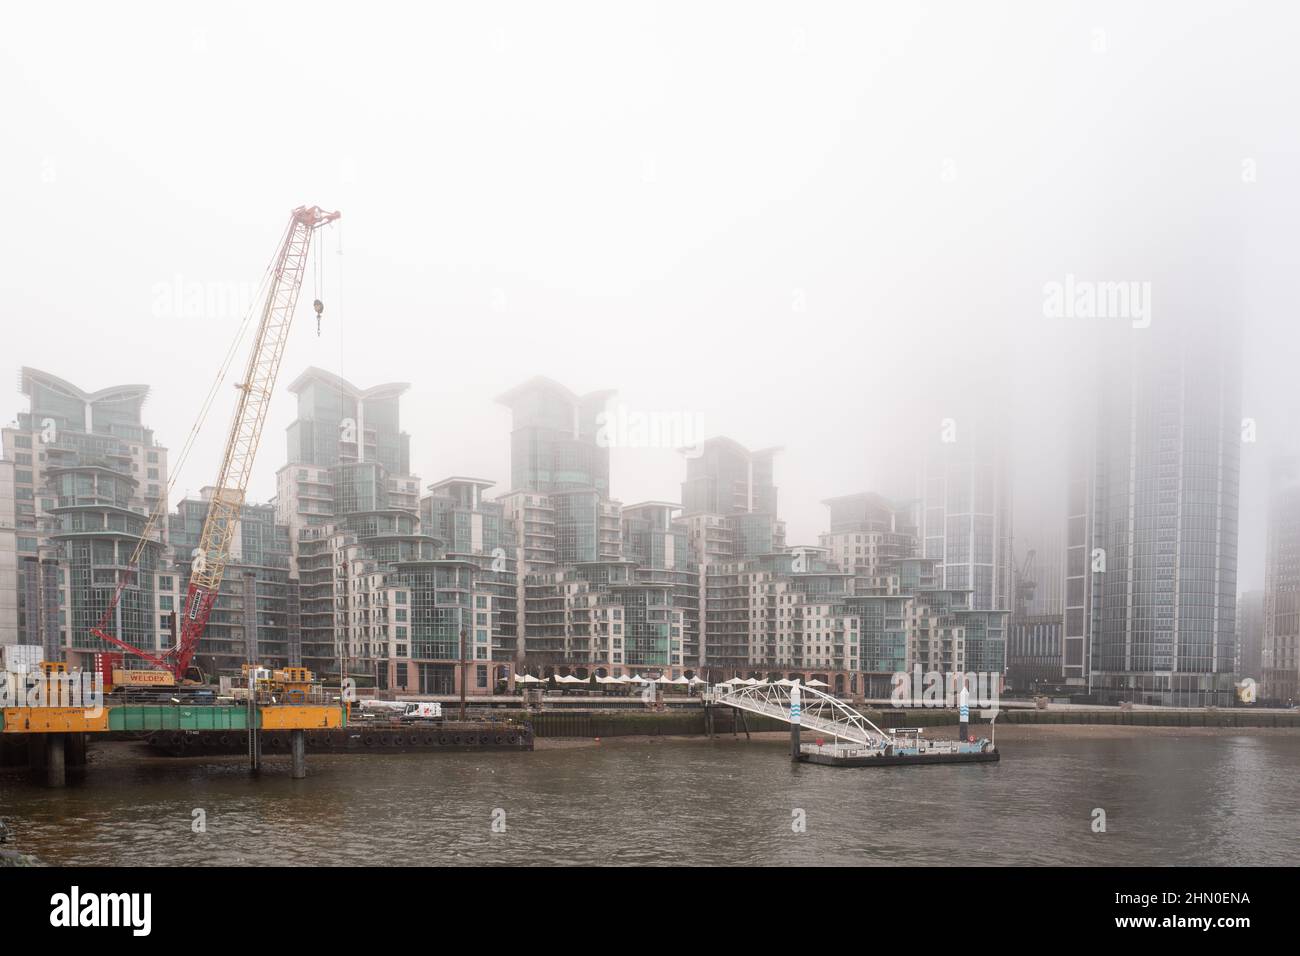 Waterfront development on the River Thames. Images taken from Vauxhall Bridge on a very damp and misty morning. Stock Photo